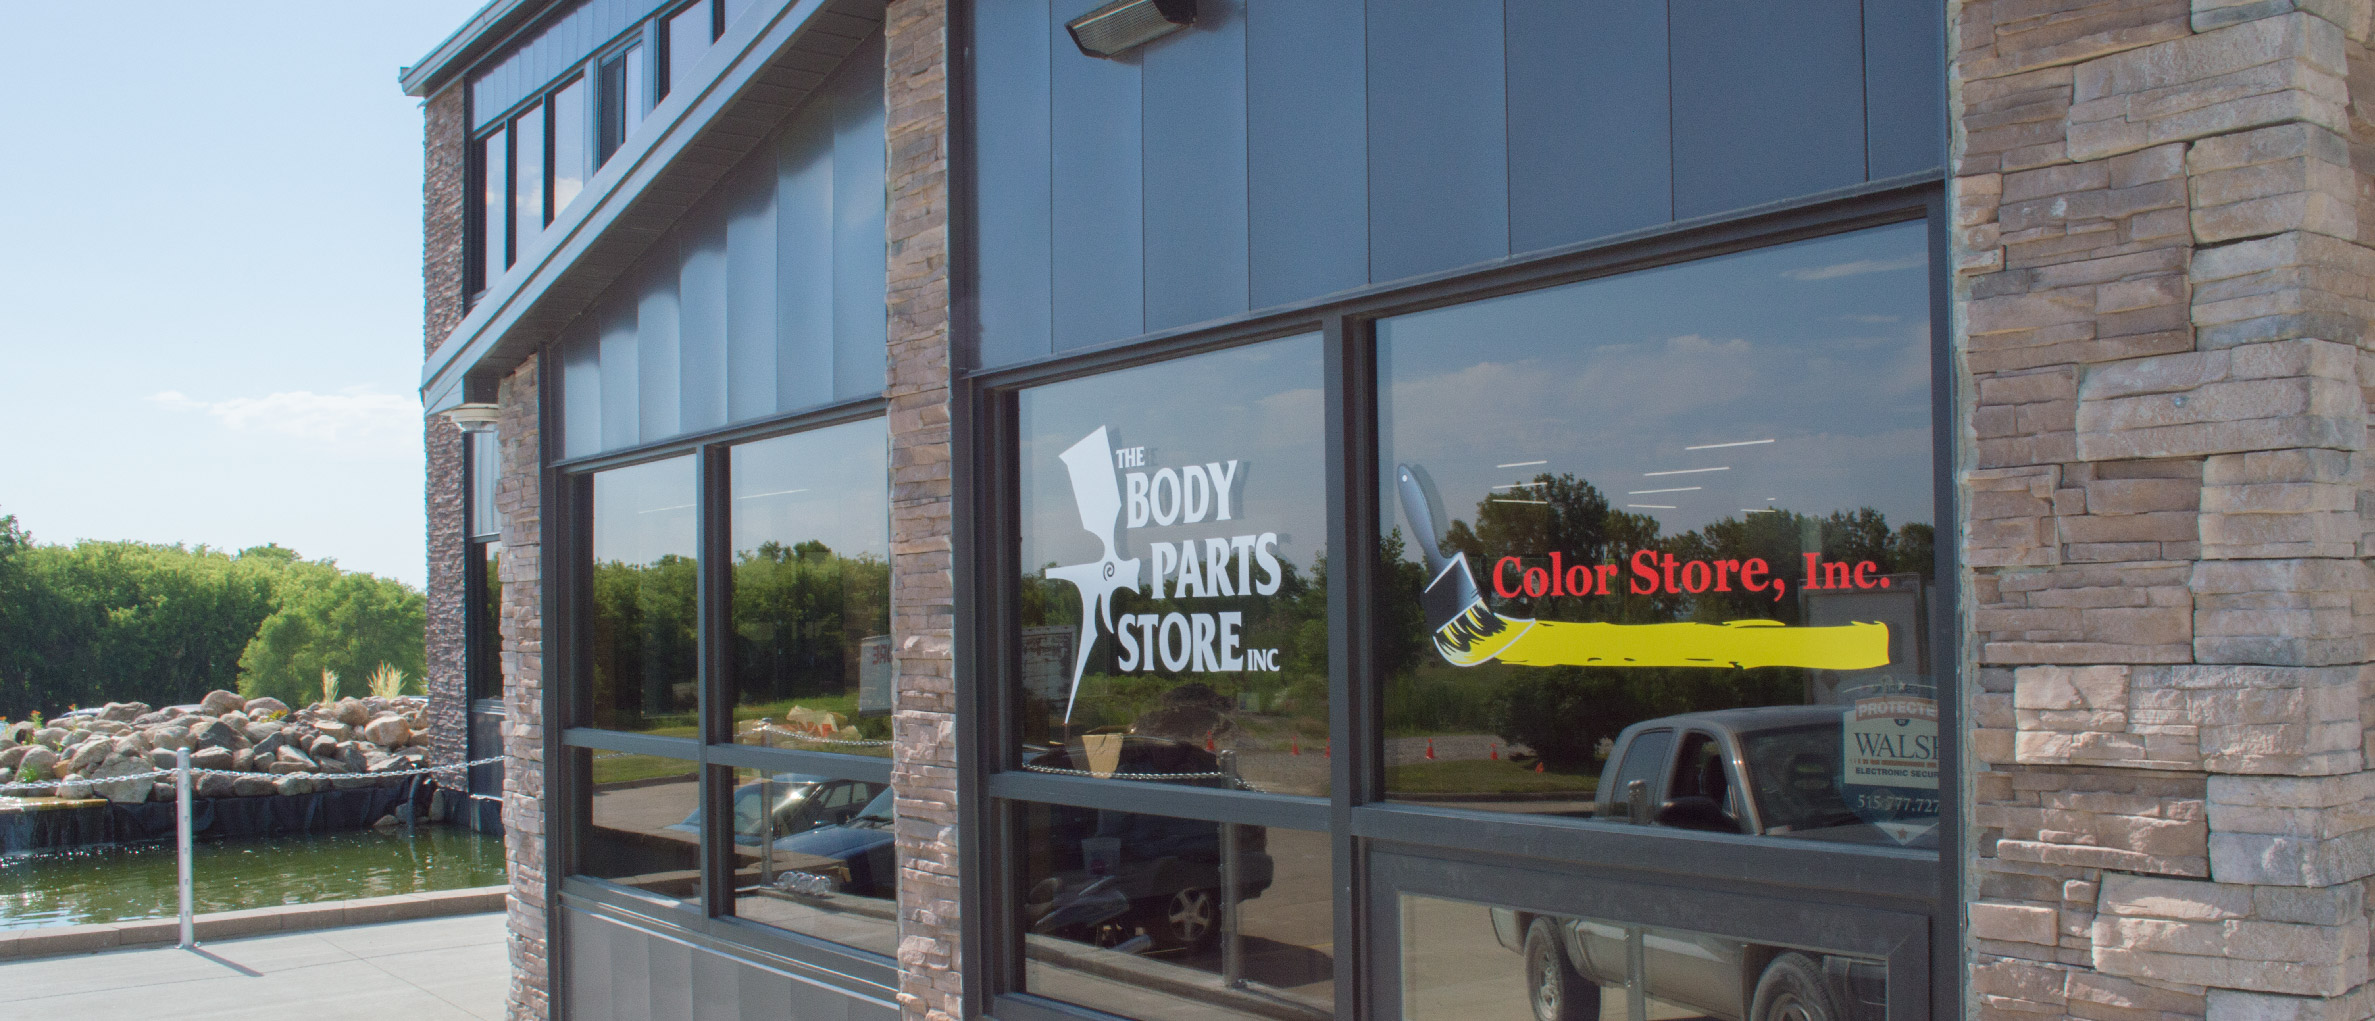 body parts store exterior